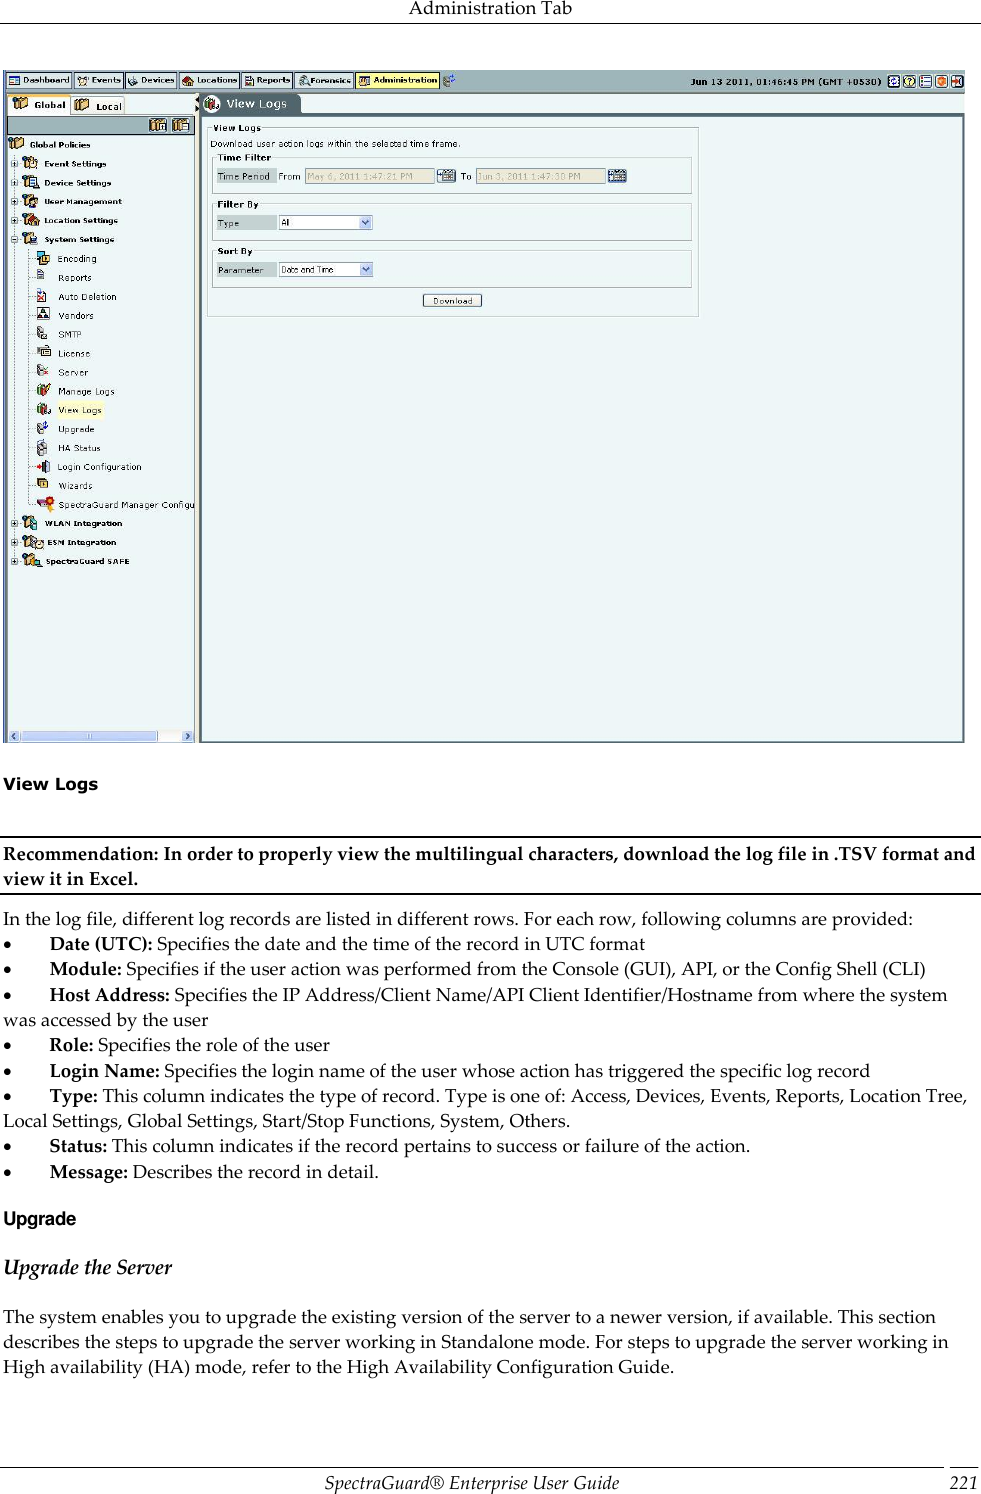 Administration Tab SpectraGuard®  Enterprise User Guide 221    View Logs   Recommendation: In order to properly view the multilingual characters, download the log file in .TSV format and view it in Excel. In the log file, different log records are listed in different rows. For each row, following columns are provided:           Date (UTC): Specifies the date and the time of the record in UTC format           Module: Specifies if the user action was performed from the Console (GUI), API, or the Config Shell (CLI)           Host Address: Specifies the IP Address/Client Name/API Client Identifier/Hostname from where the system was accessed by the user           Role: Specifies the role of the user           Login Name: Specifies the login name of the user whose action has triggered the specific log record           Type: This column indicates the type of record. Type is one of: Access, Devices, Events, Reports, Location Tree, Local Settings, Global Settings, Start/Stop Functions, System, Others.           Status: This column indicates if the record pertains to success or failure of the action.           Message: Describes the record in detail. Upgrade Upgrade the Server The system enables you to upgrade the existing version of the server to a newer version, if available. This section describes the steps to upgrade the server working in Standalone mode. For steps to upgrade the server working in High availability (HA) mode, refer to the High Availability Configuration Guide. 